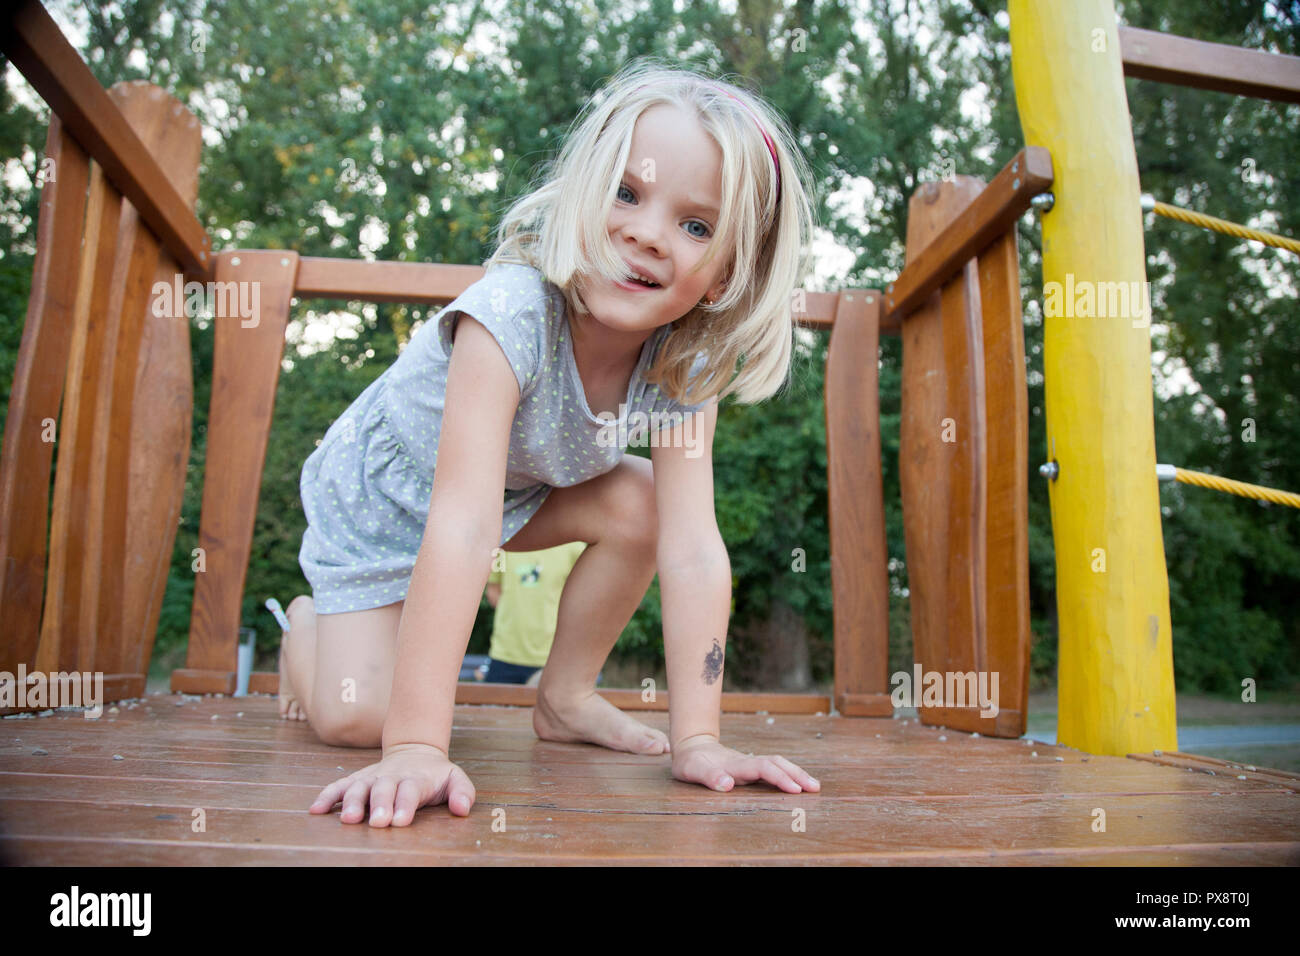 1. Cute little girl with blond hair playing in the park - wide 10